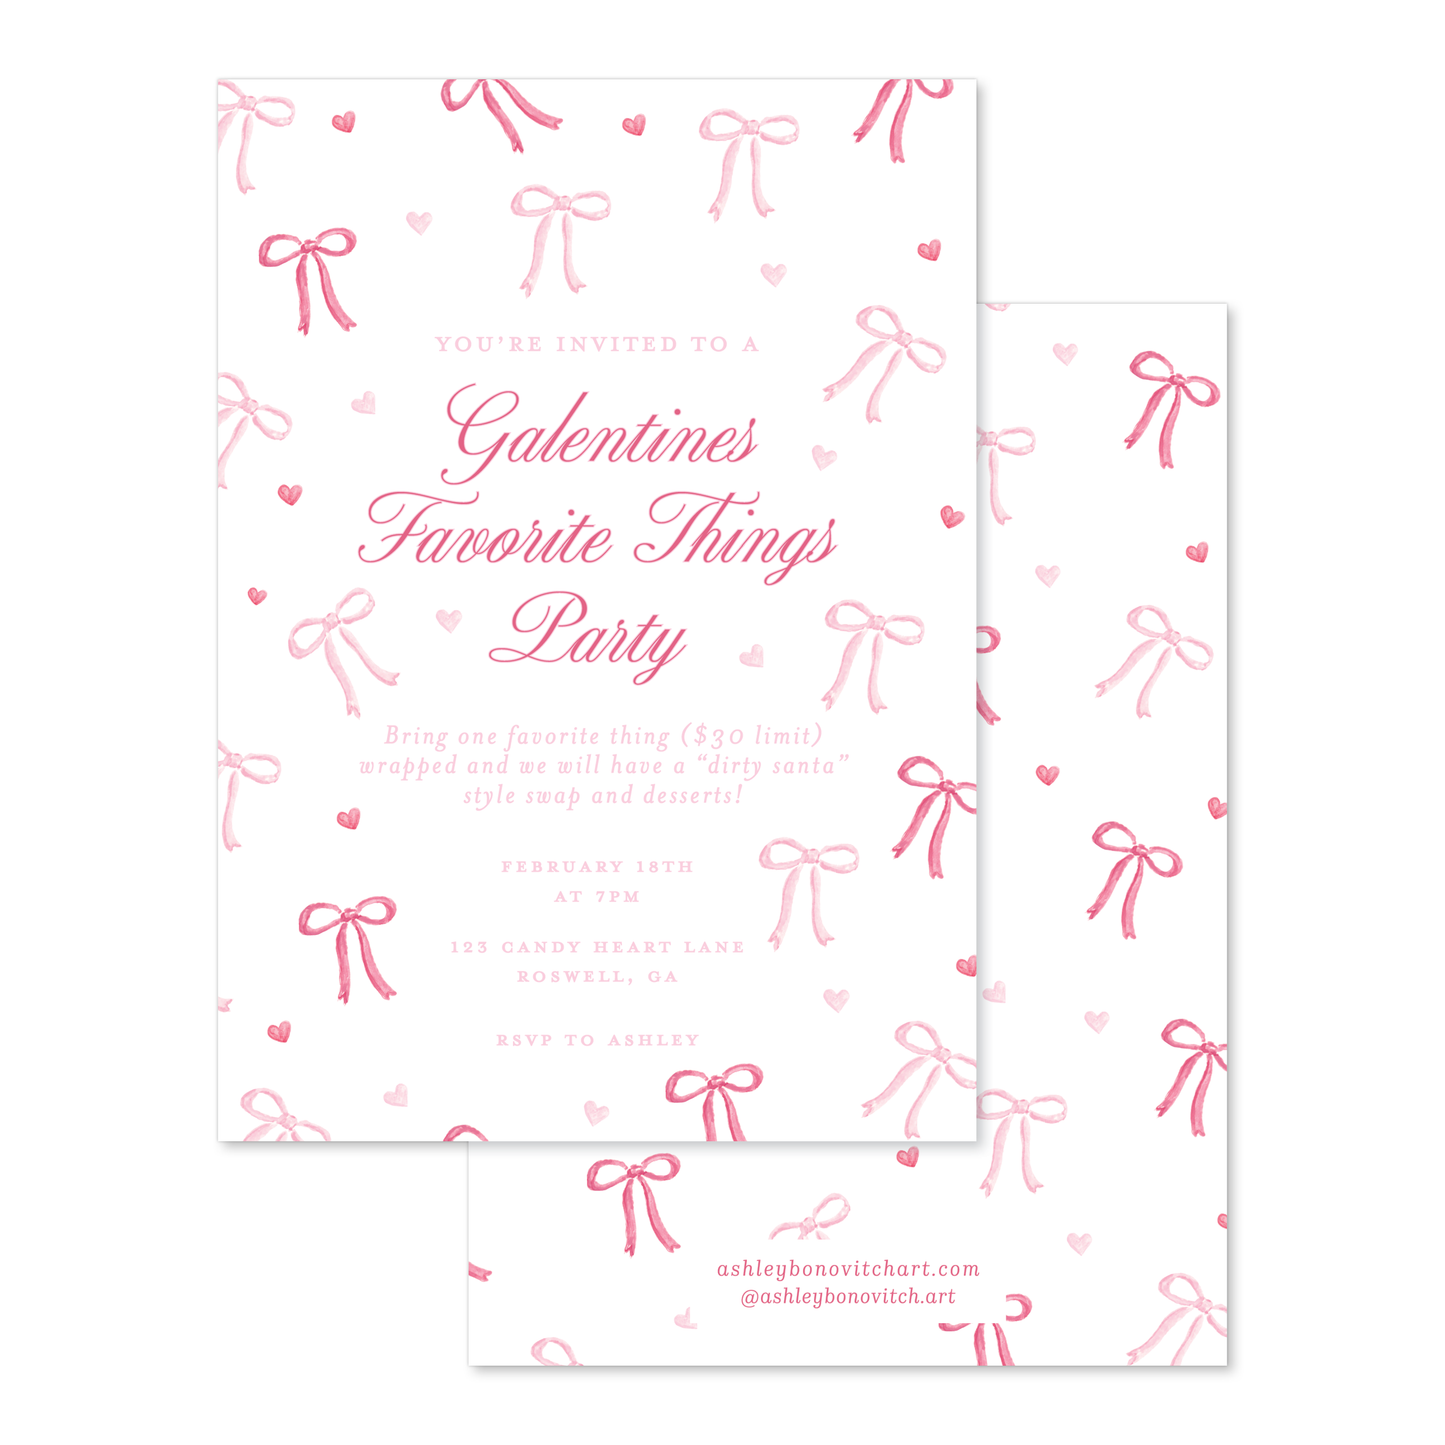 Valentines Ribbons and Bows Party Invitations